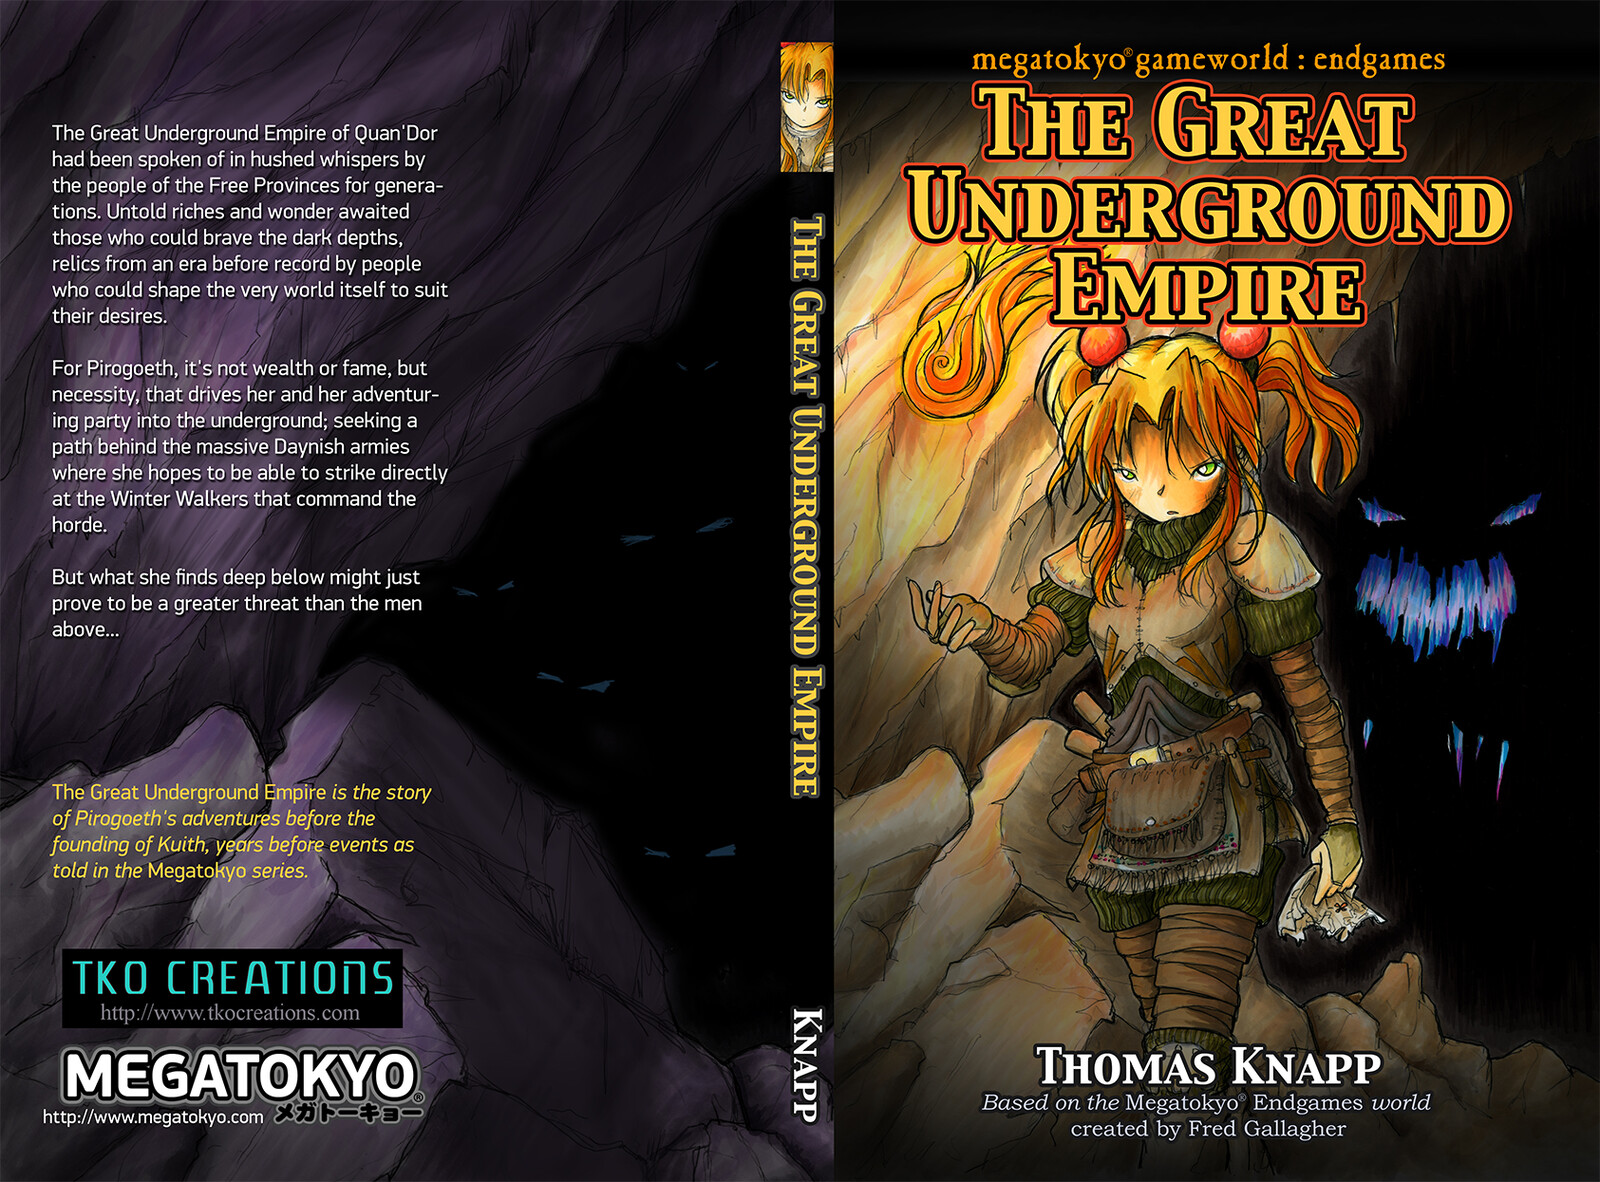 Mockup for the final book cover